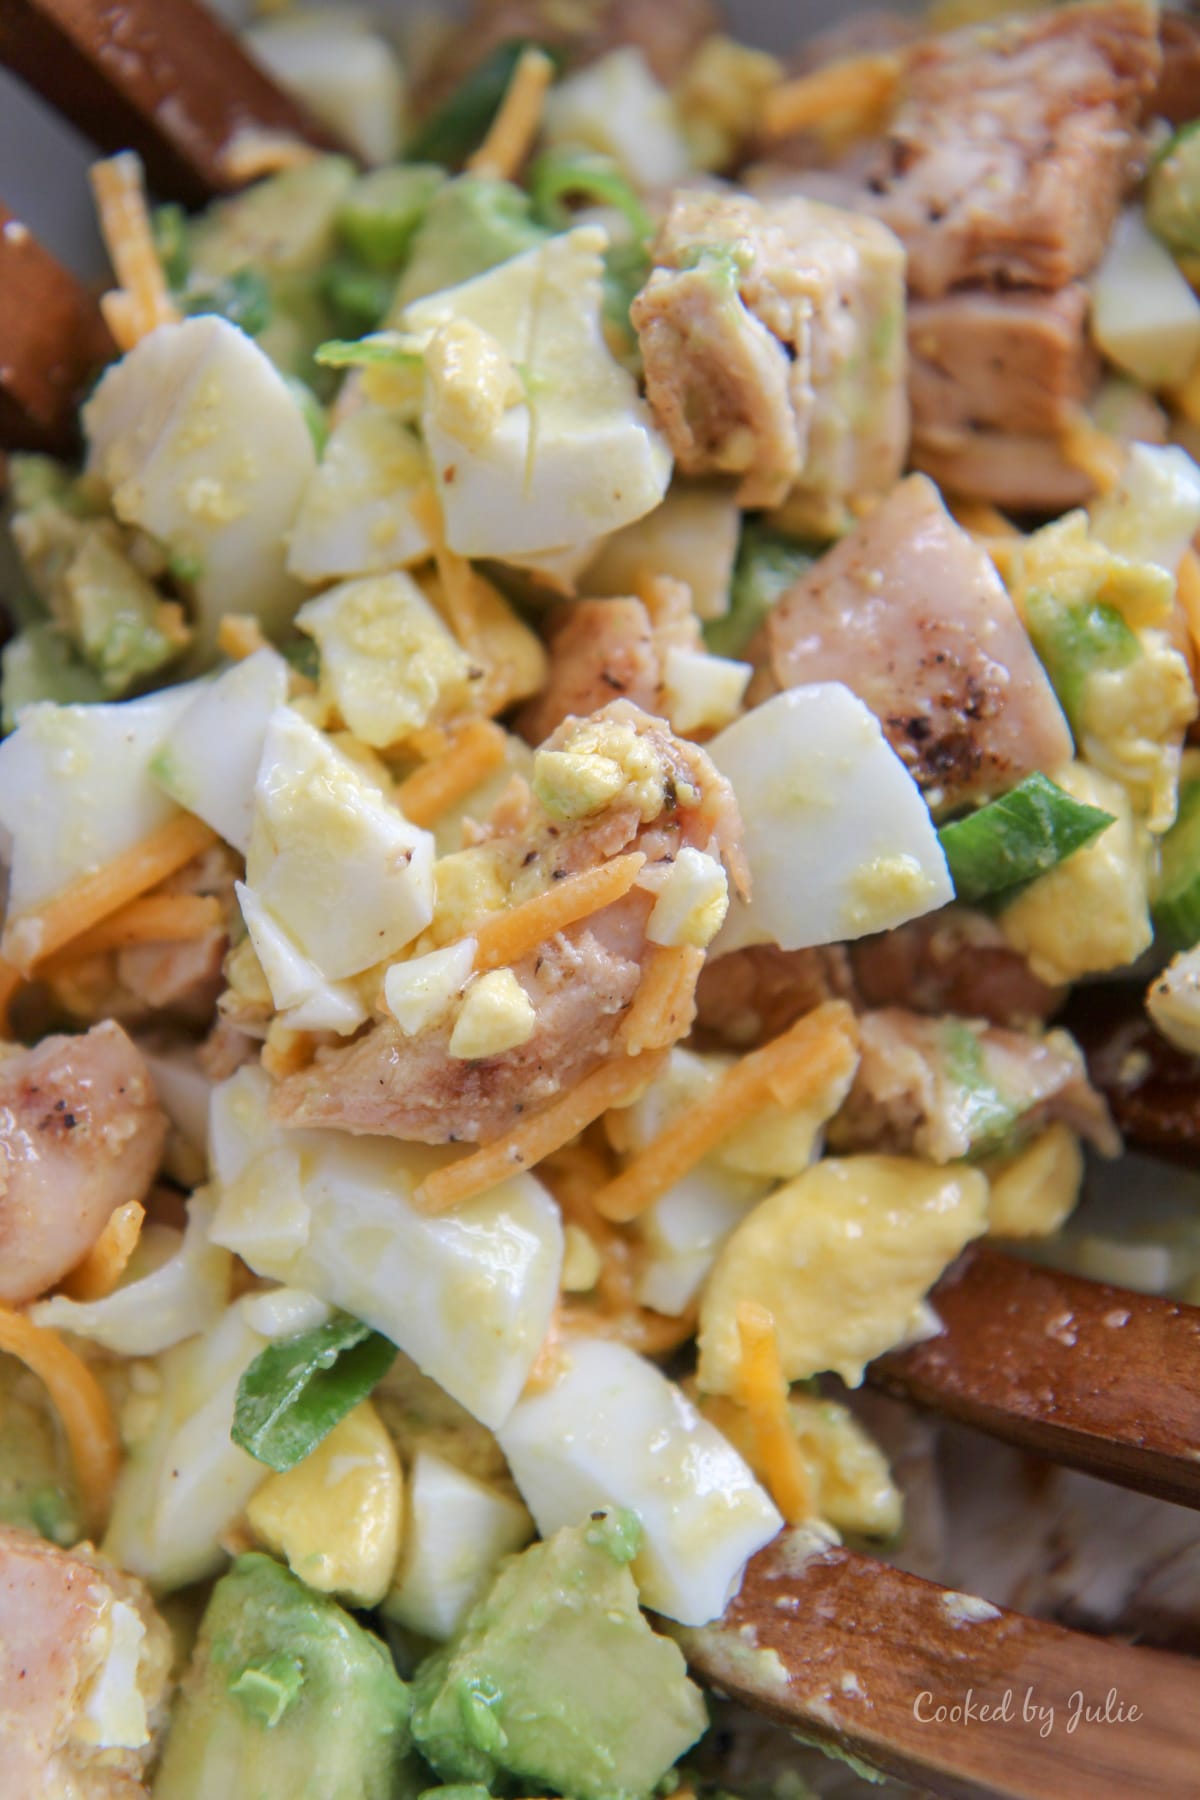 eggs, avocados, cheese, chicken, and scallions tossed in a lemon vinaigrette